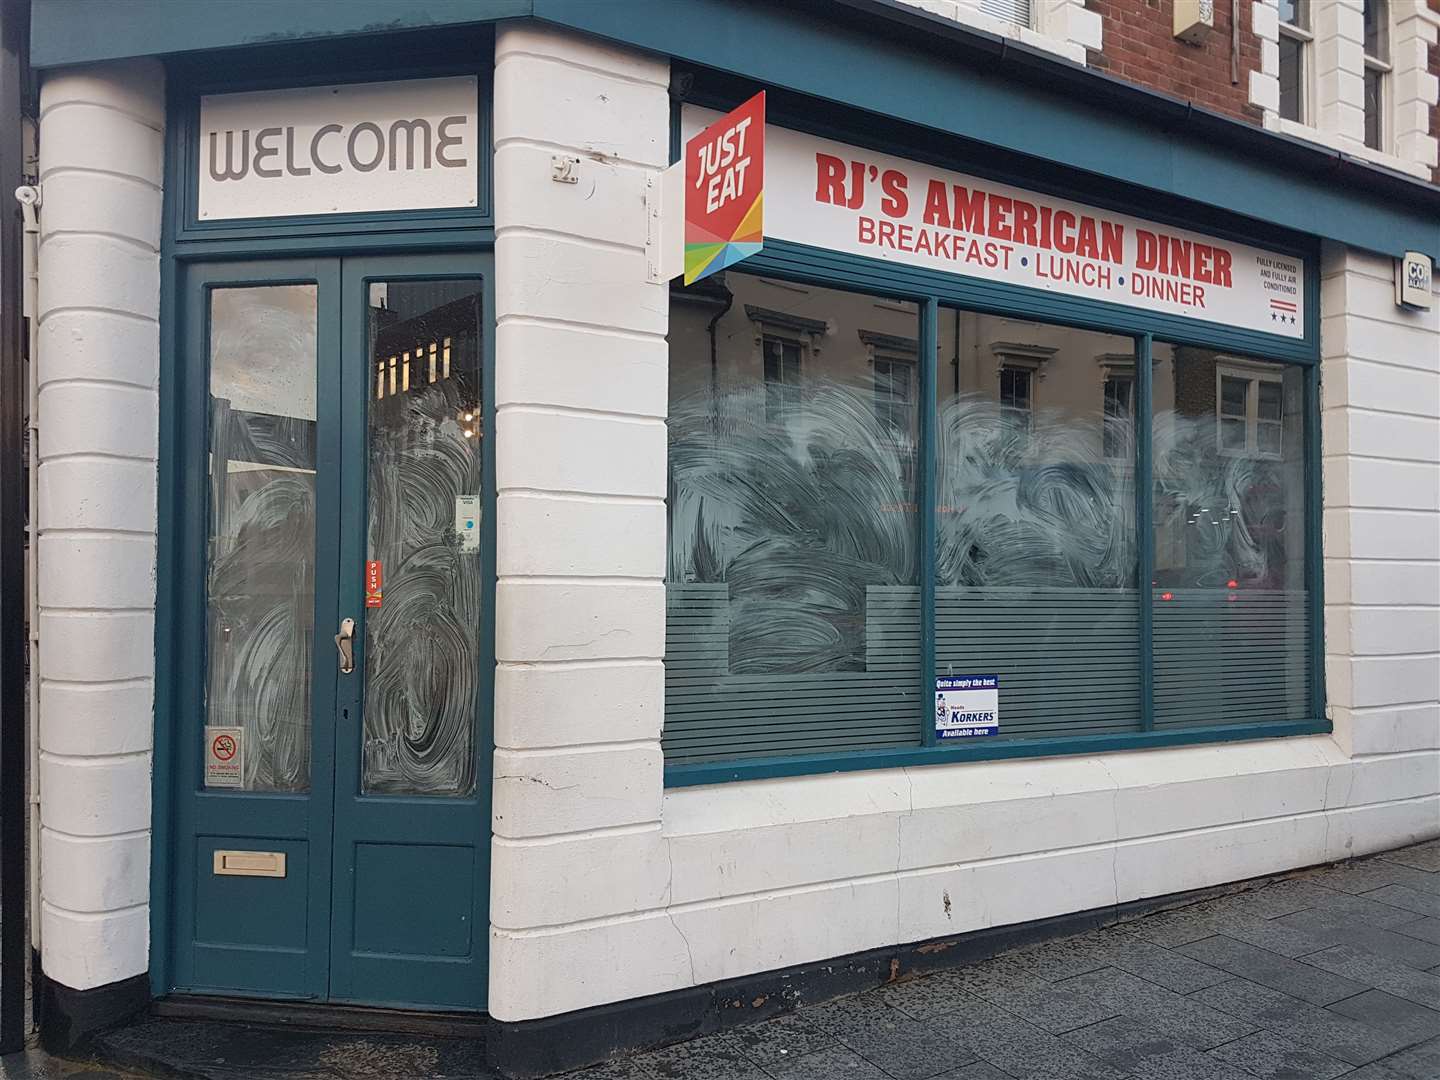 RJ's American Diner now has whitewashed windows and is not accepting orders on Deliveroo